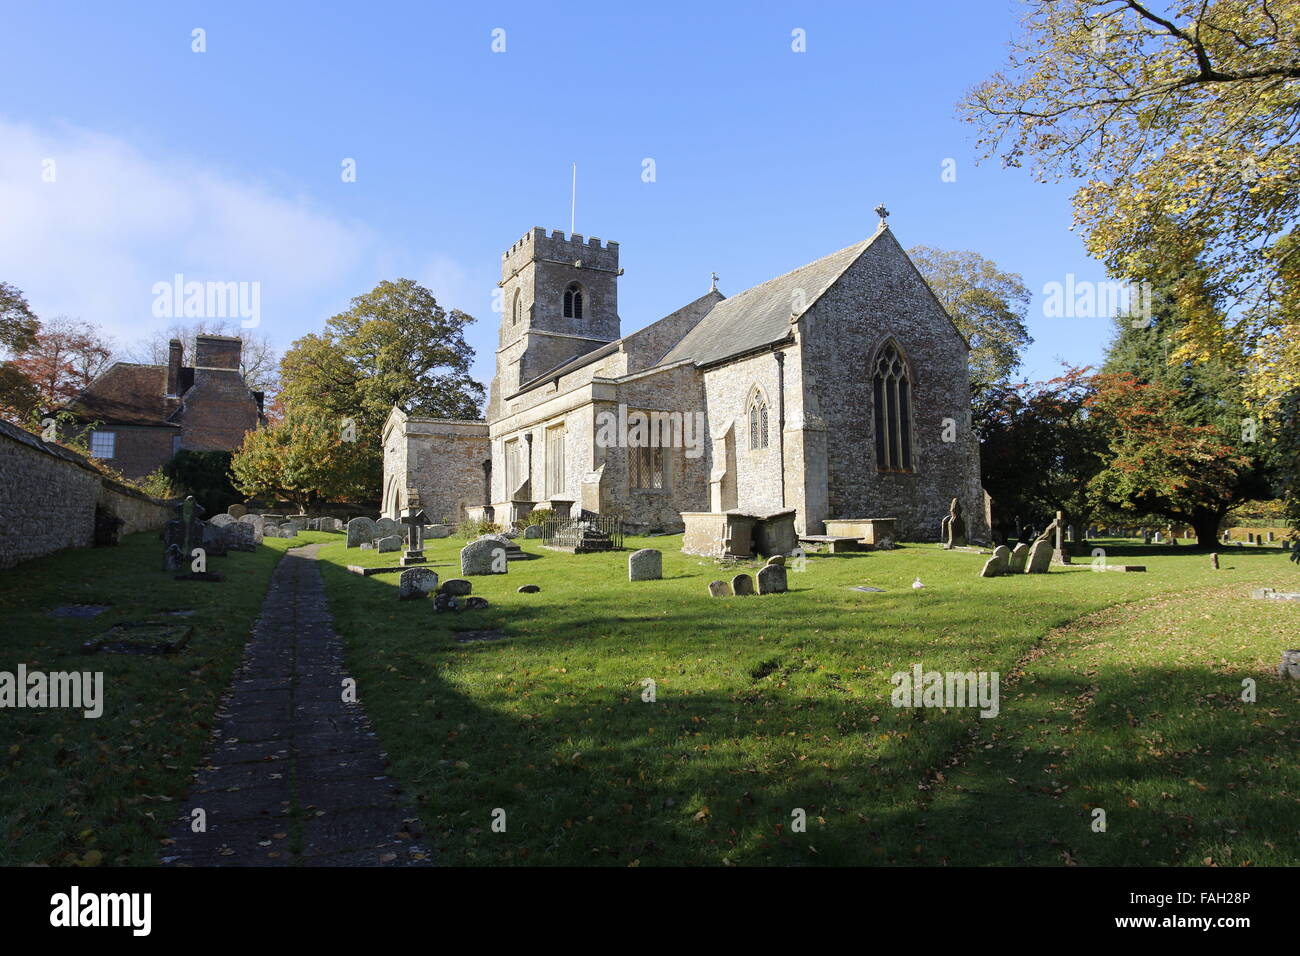 St.-Georgs Kirche Ogbourne St George Wiltshire England Stockfoto